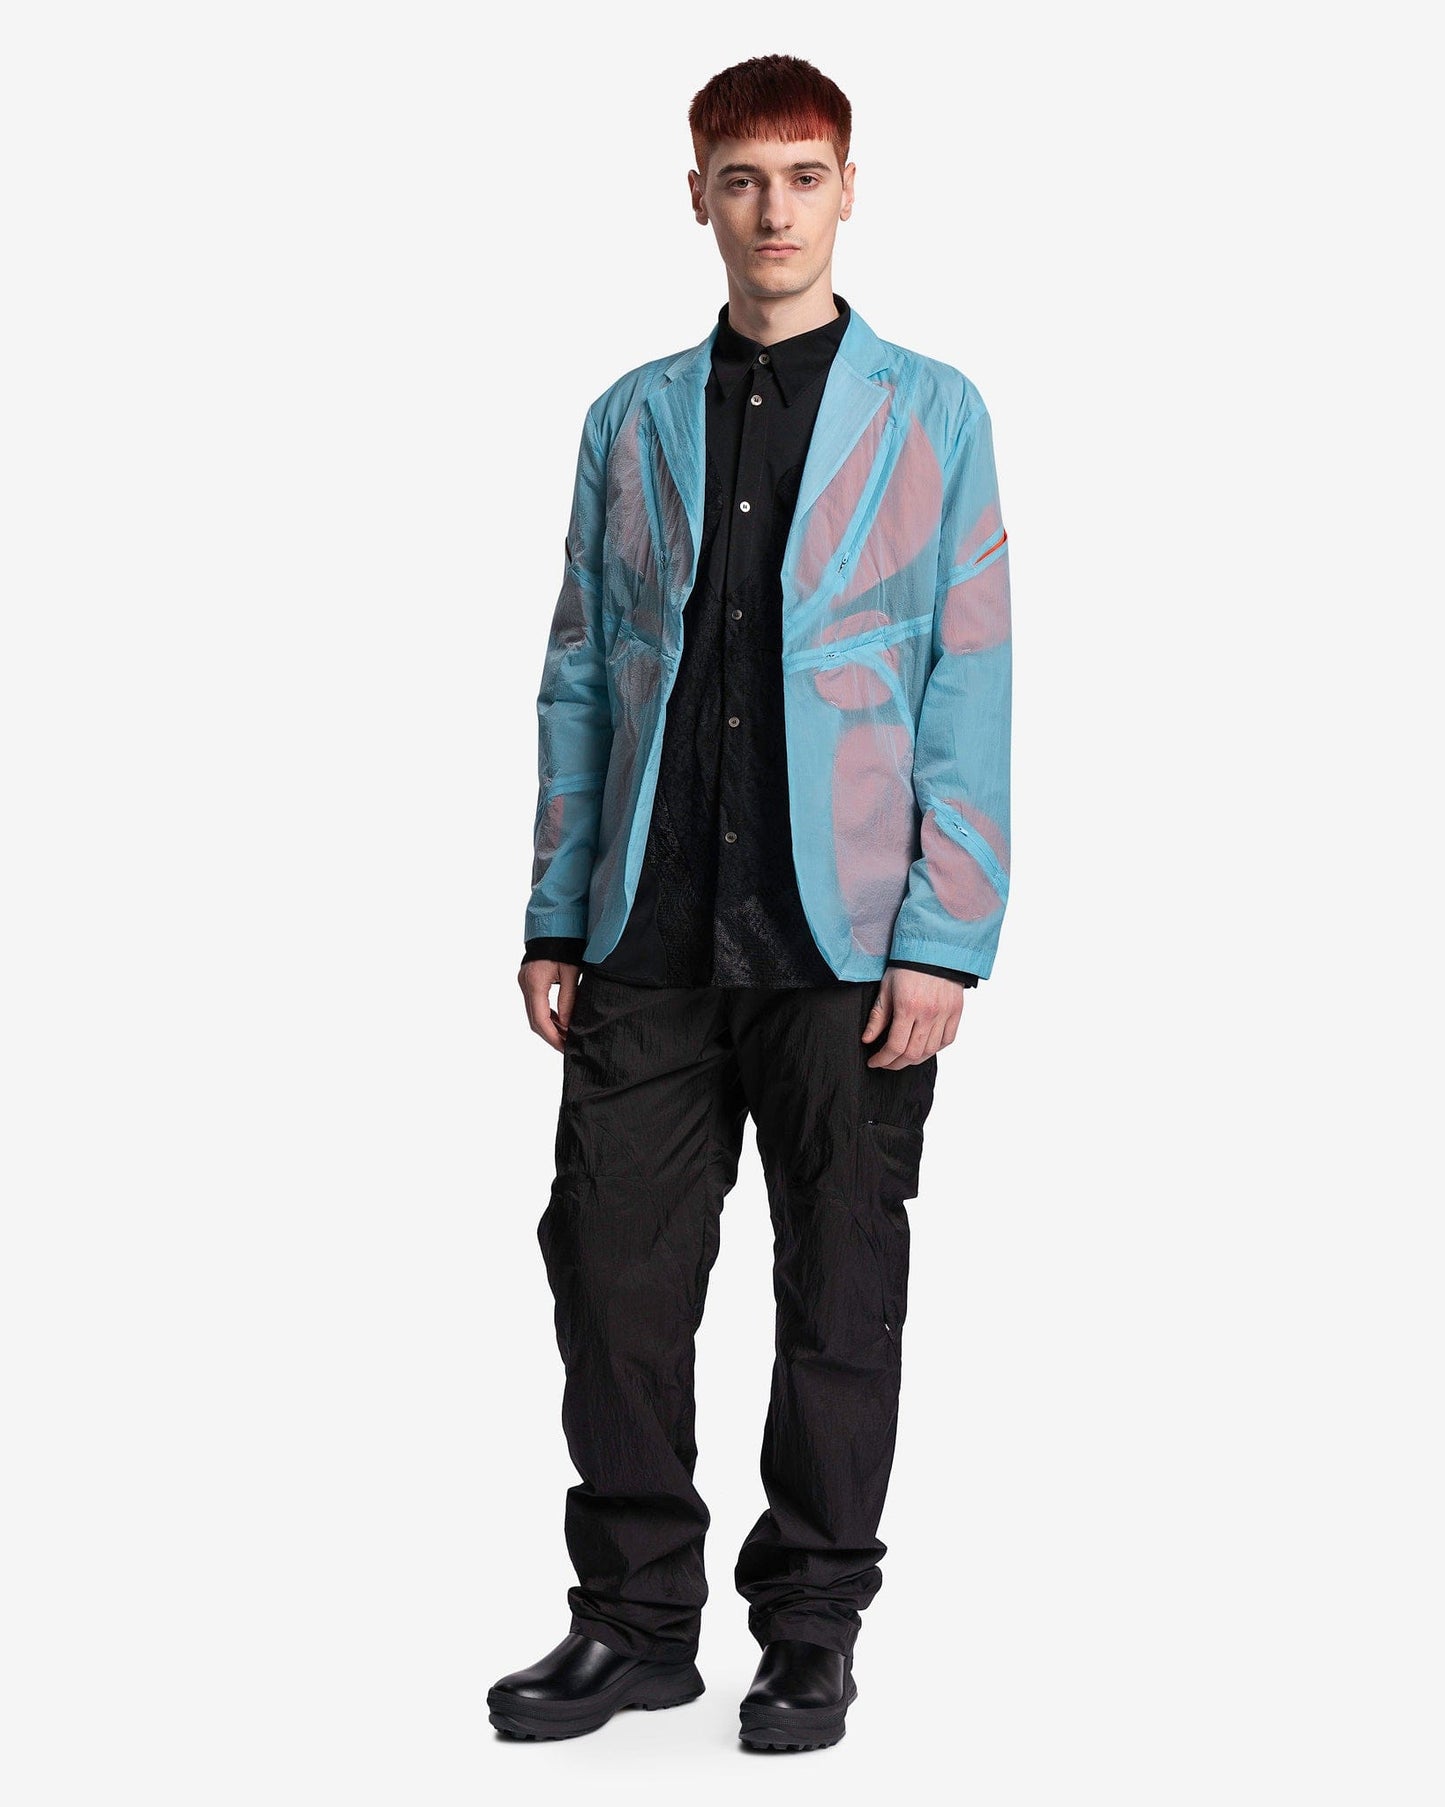 POST ARCHIVE FACTION (P.A.F) Men's Jackets 5.0+ Jacket Center in Sky Blue/Red